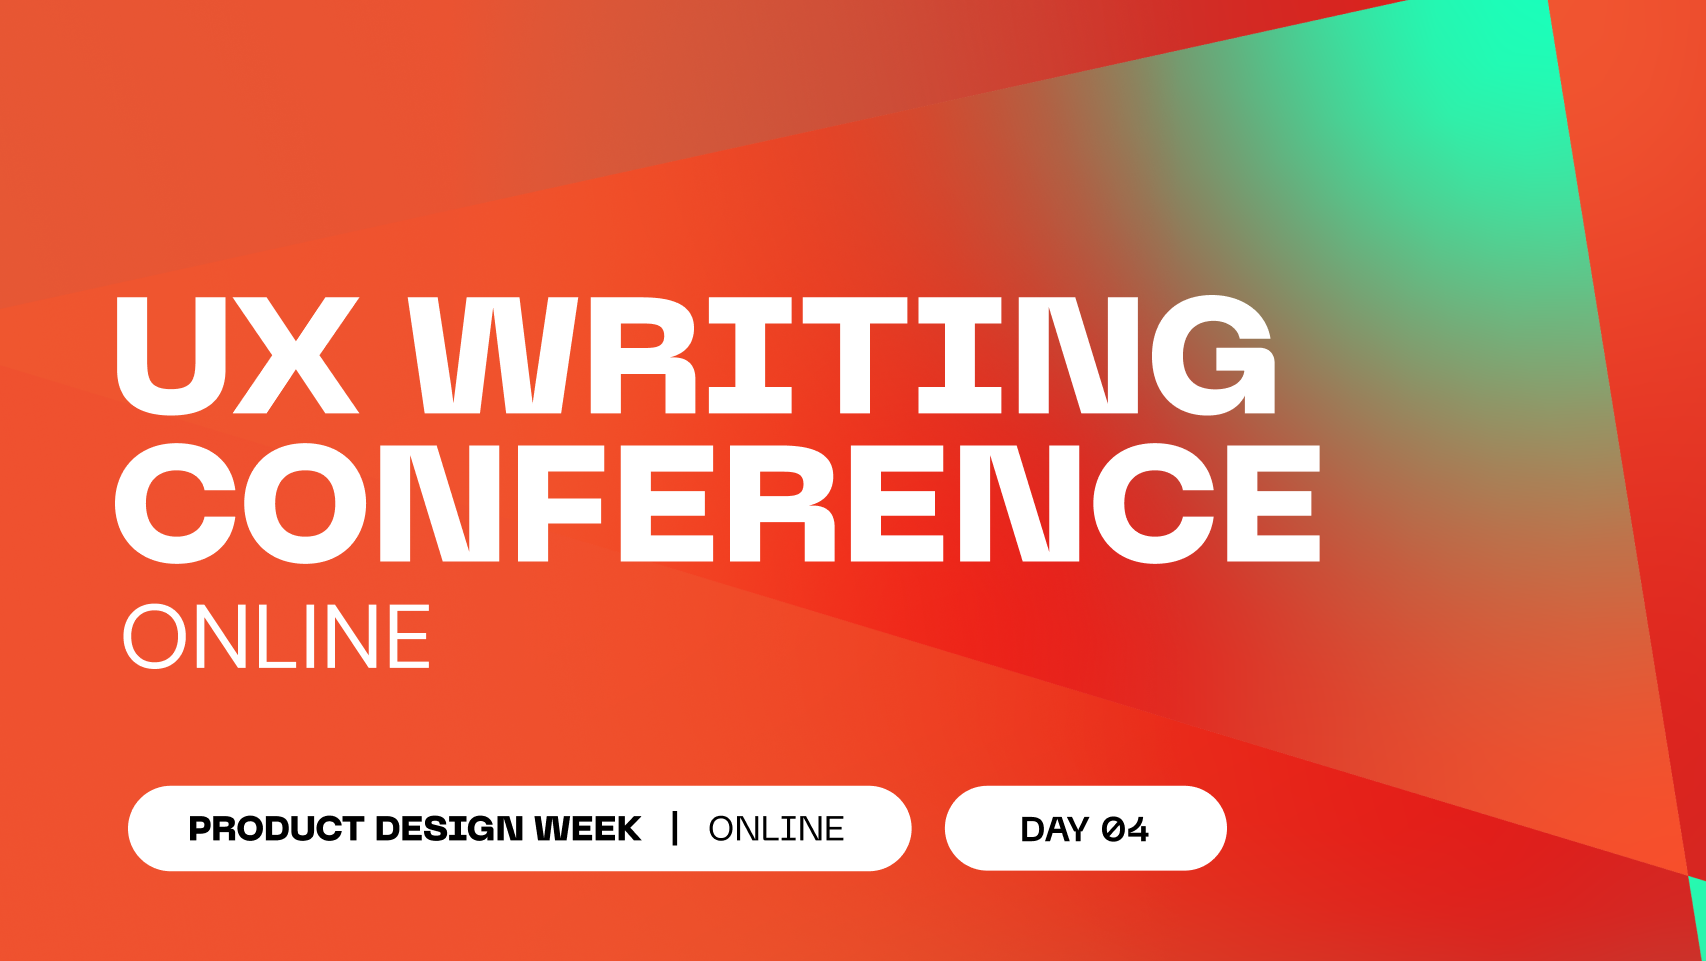 UX Writing Conference Online